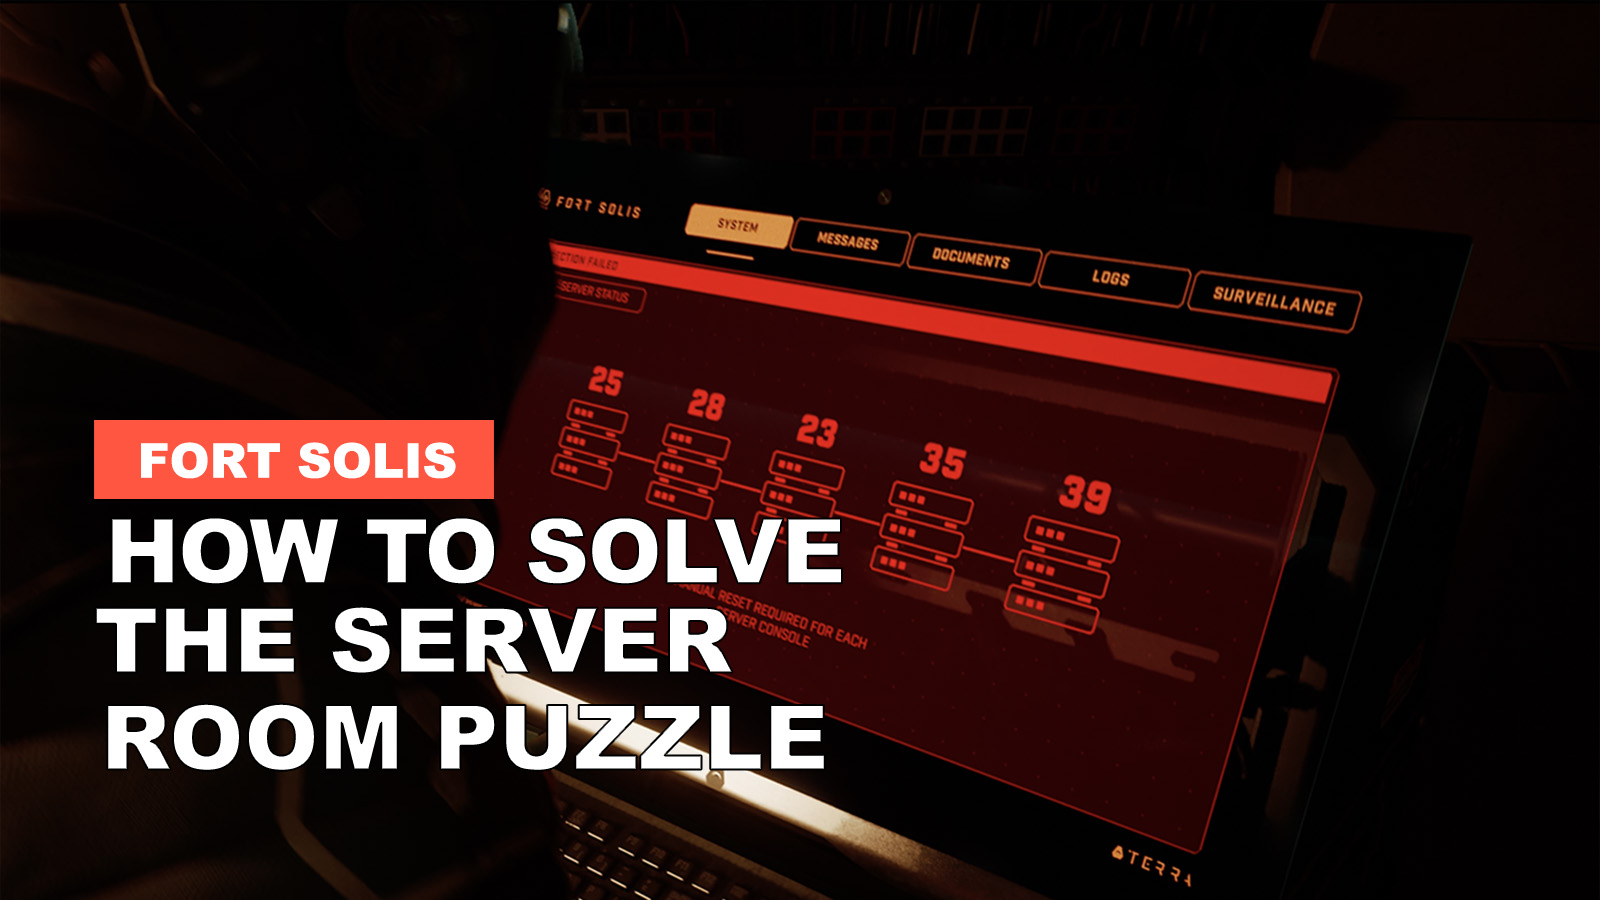 How To Solve The Server Room Puzzle In Fort Solis